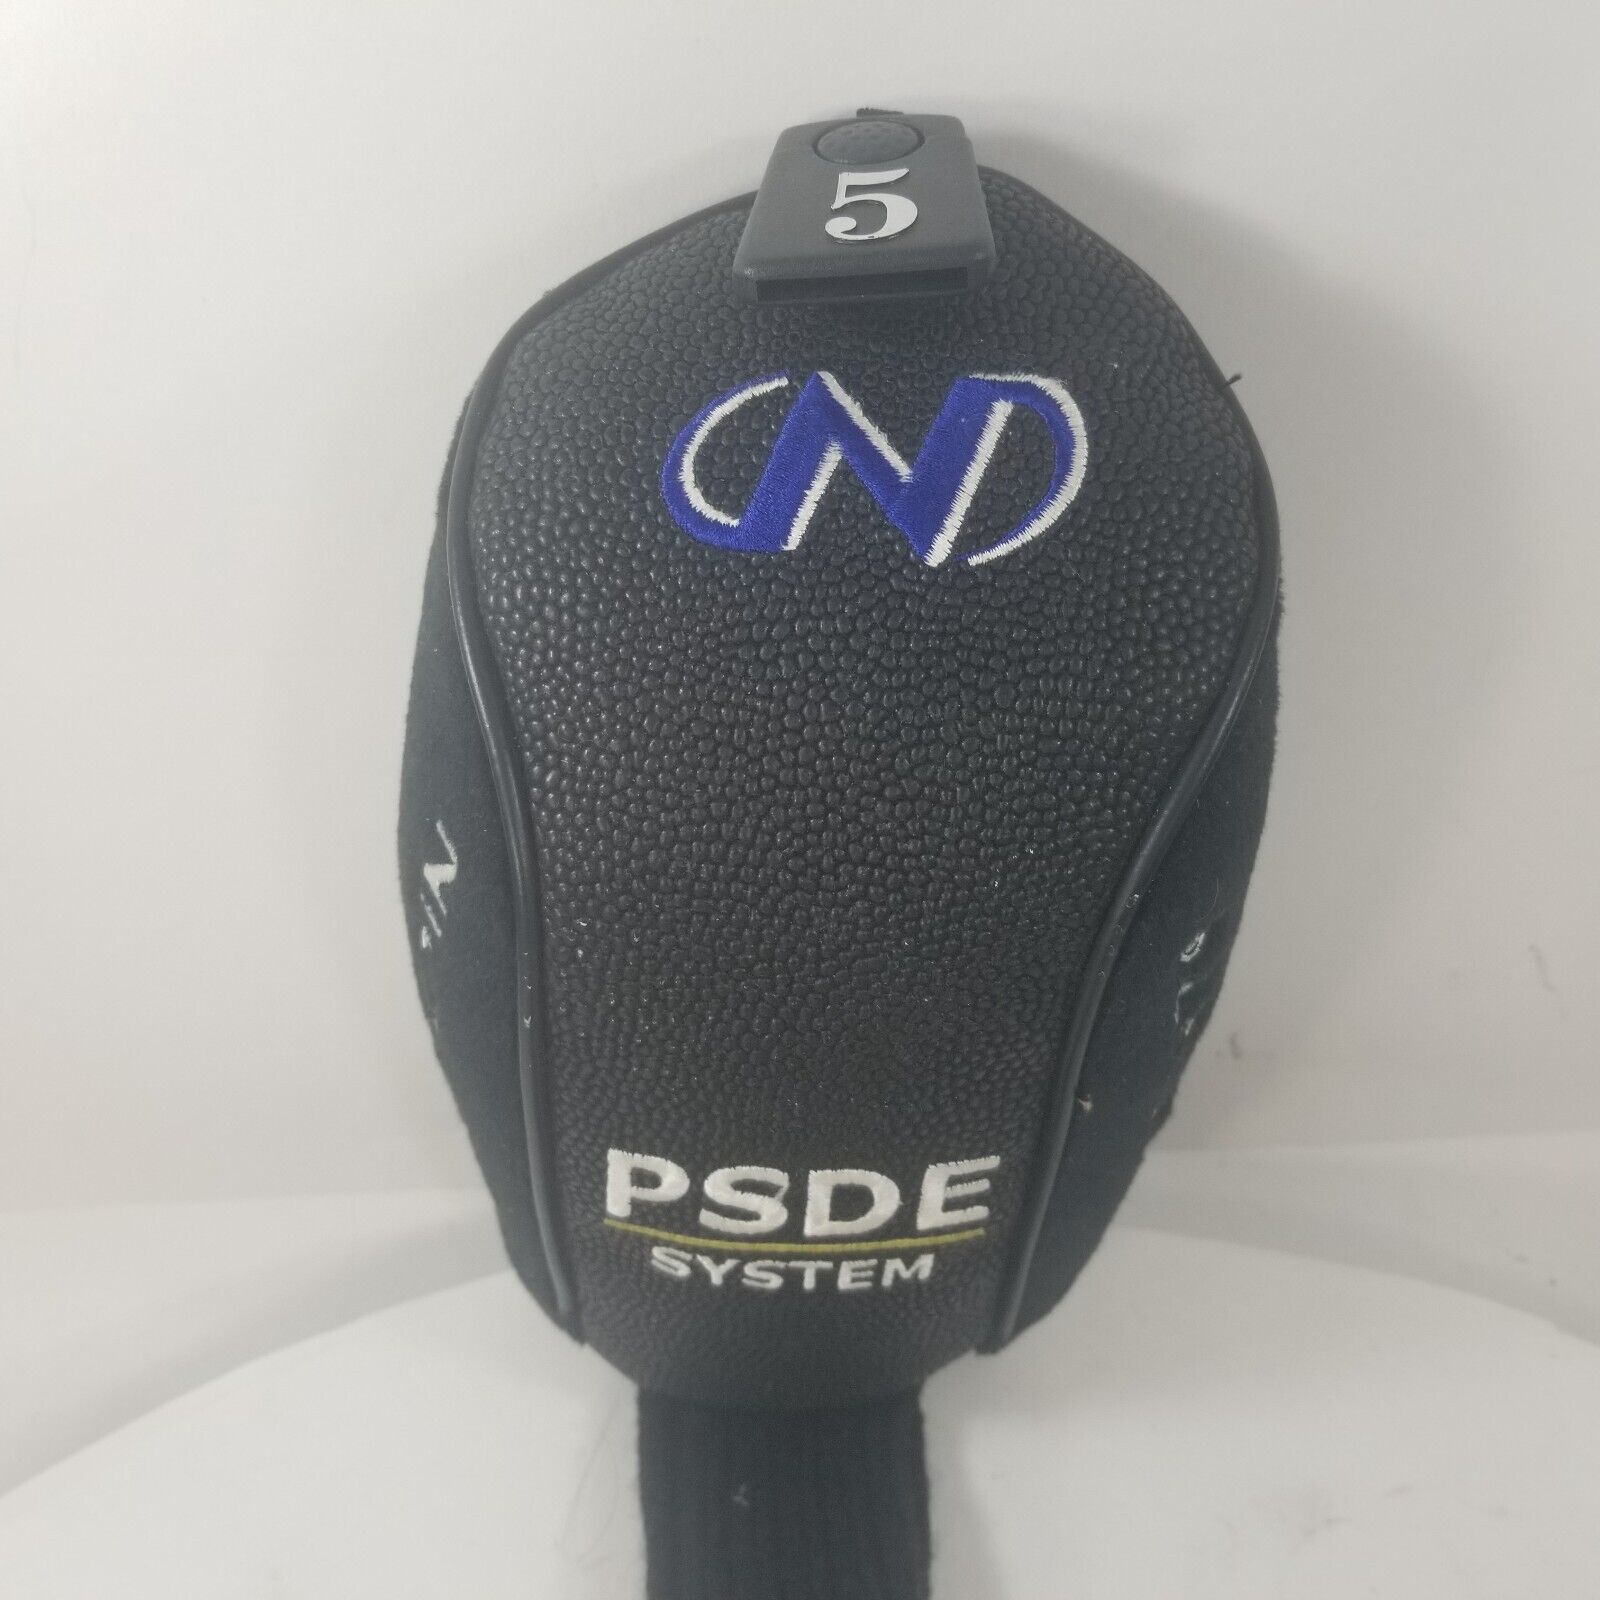 Nickent PSDE System Golf Club Head Cover 5 Fairway Wood Headcover